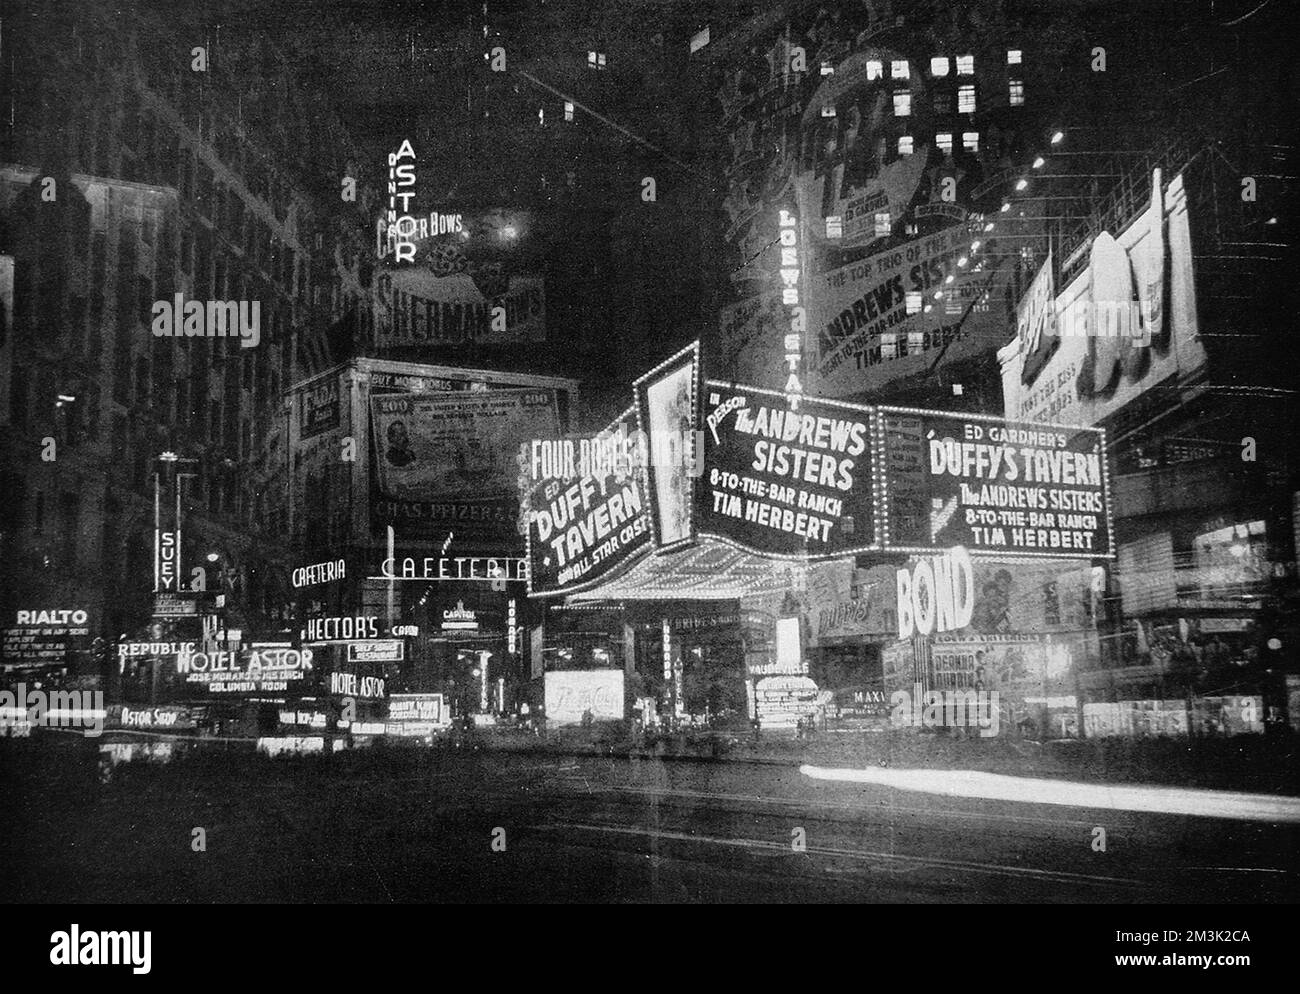 The lights of Broadway, New York, at night in 1945. After war-time austerity, these lights signalled an up-swing in American recreation.  This photograph is a double-exposure (or more) with several views of the Broadway superimposed and printed as one picture.     Date: 1945 Stock Photo